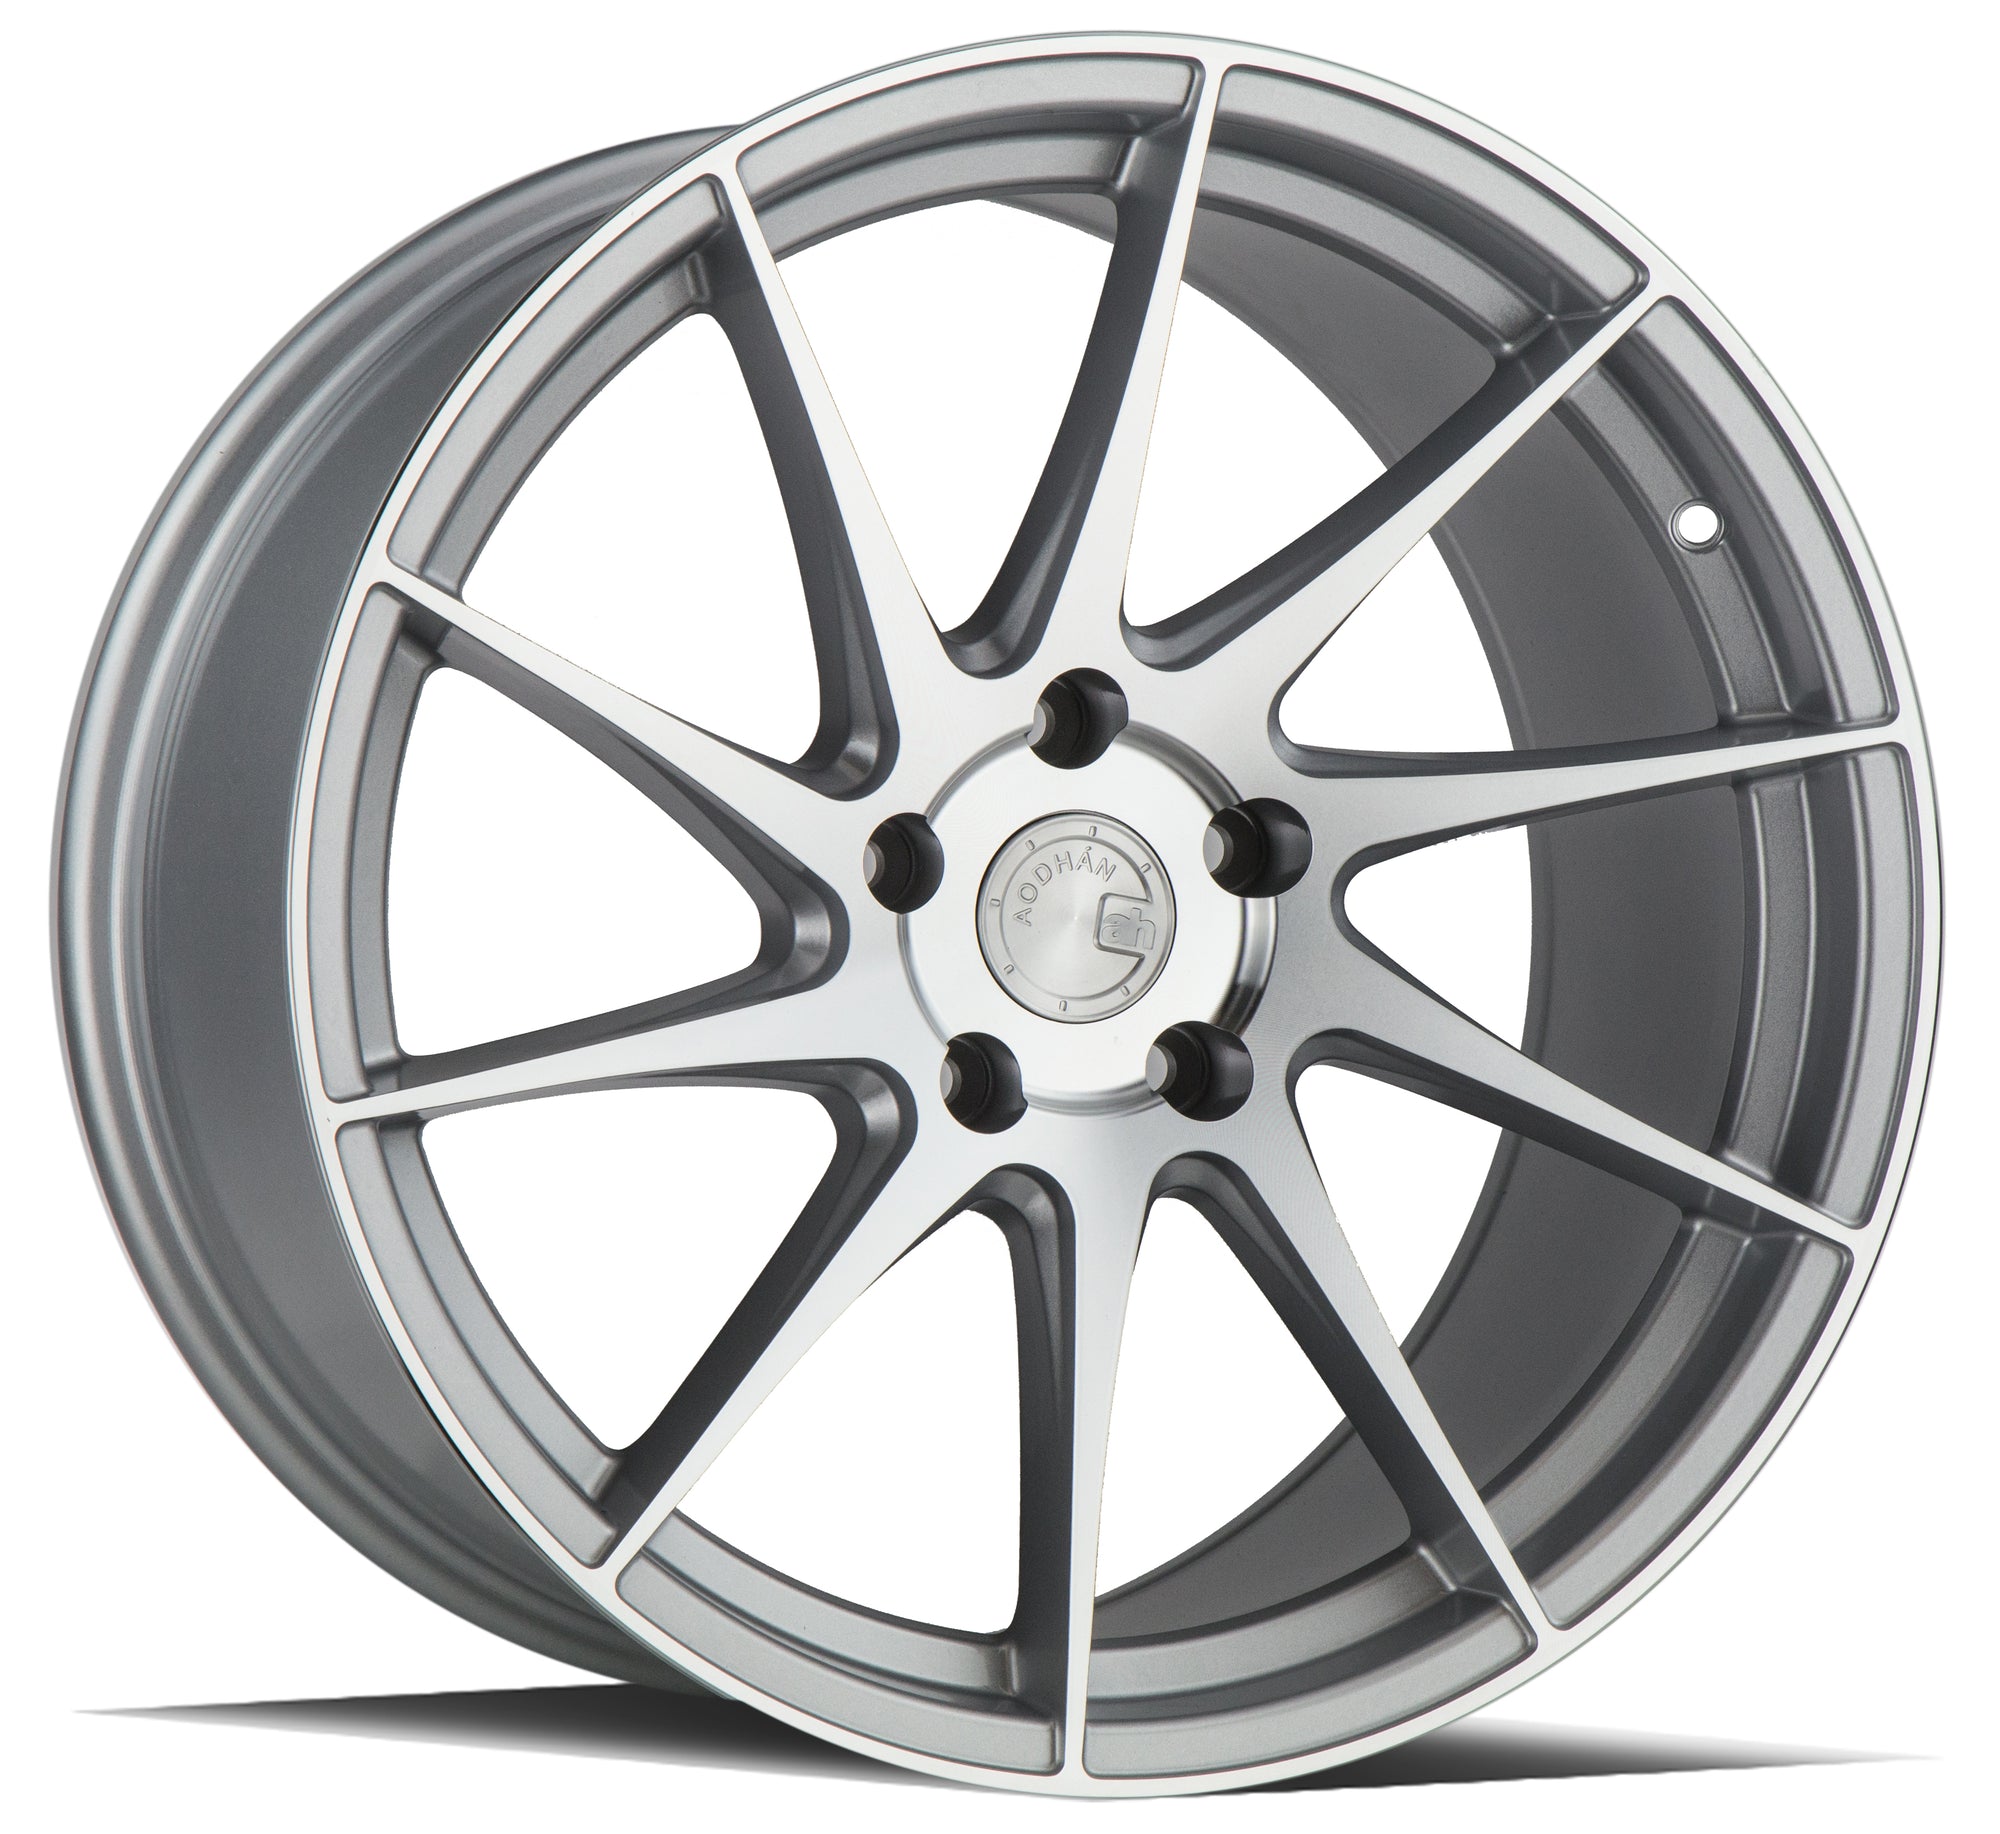 Aodhan AH09 18x8.5 (Driver Side) 5x100 +35 Gloss Silver Machined Face